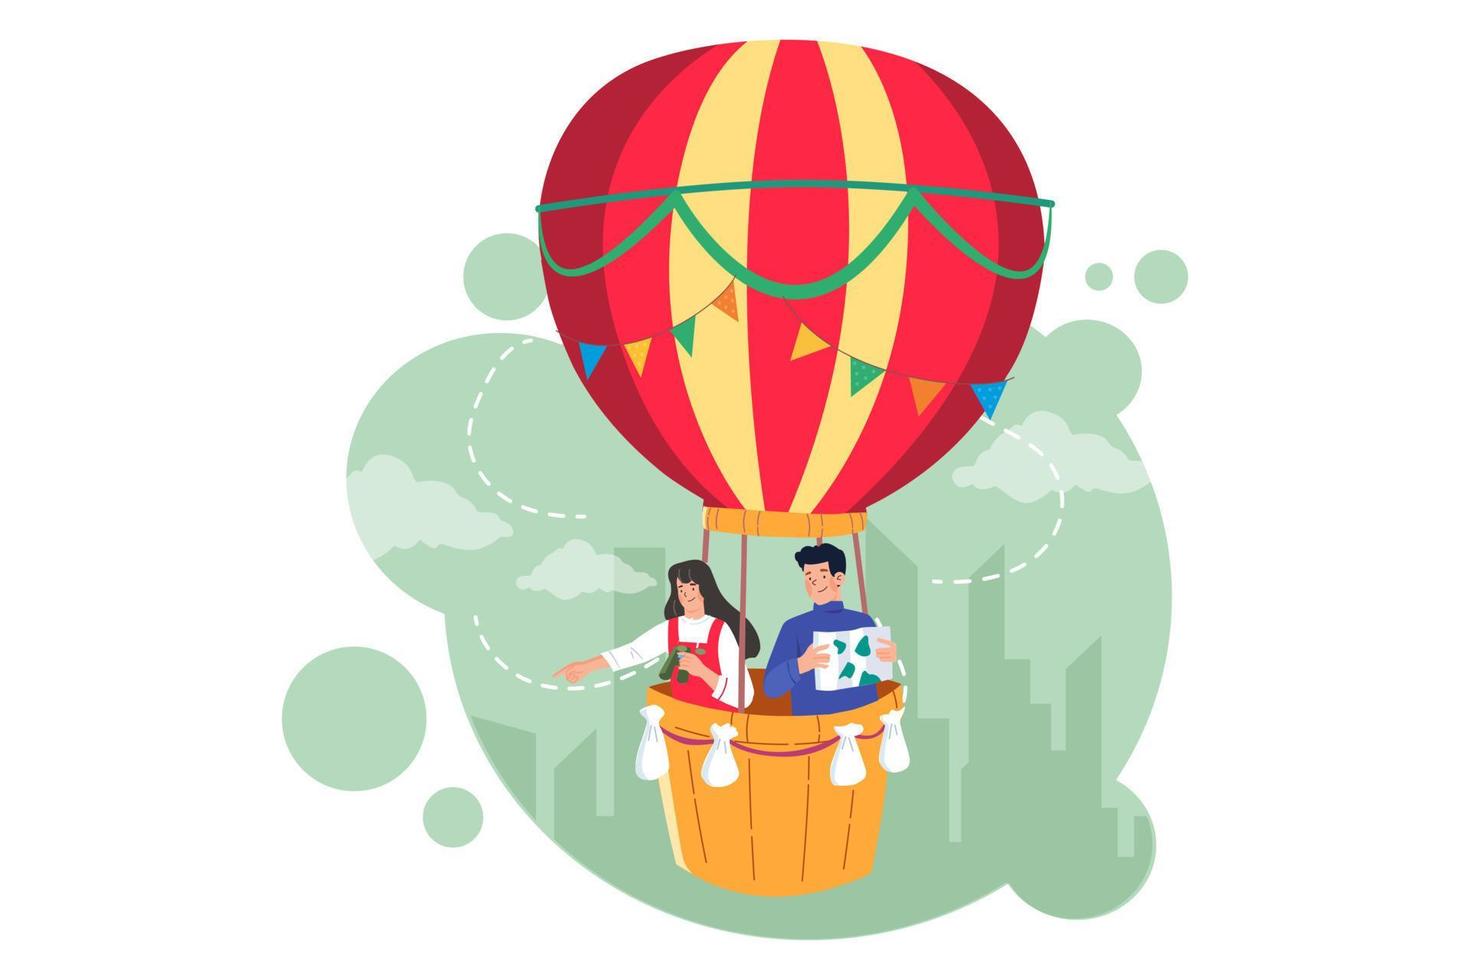 Man and woman in a hot air balloon vector